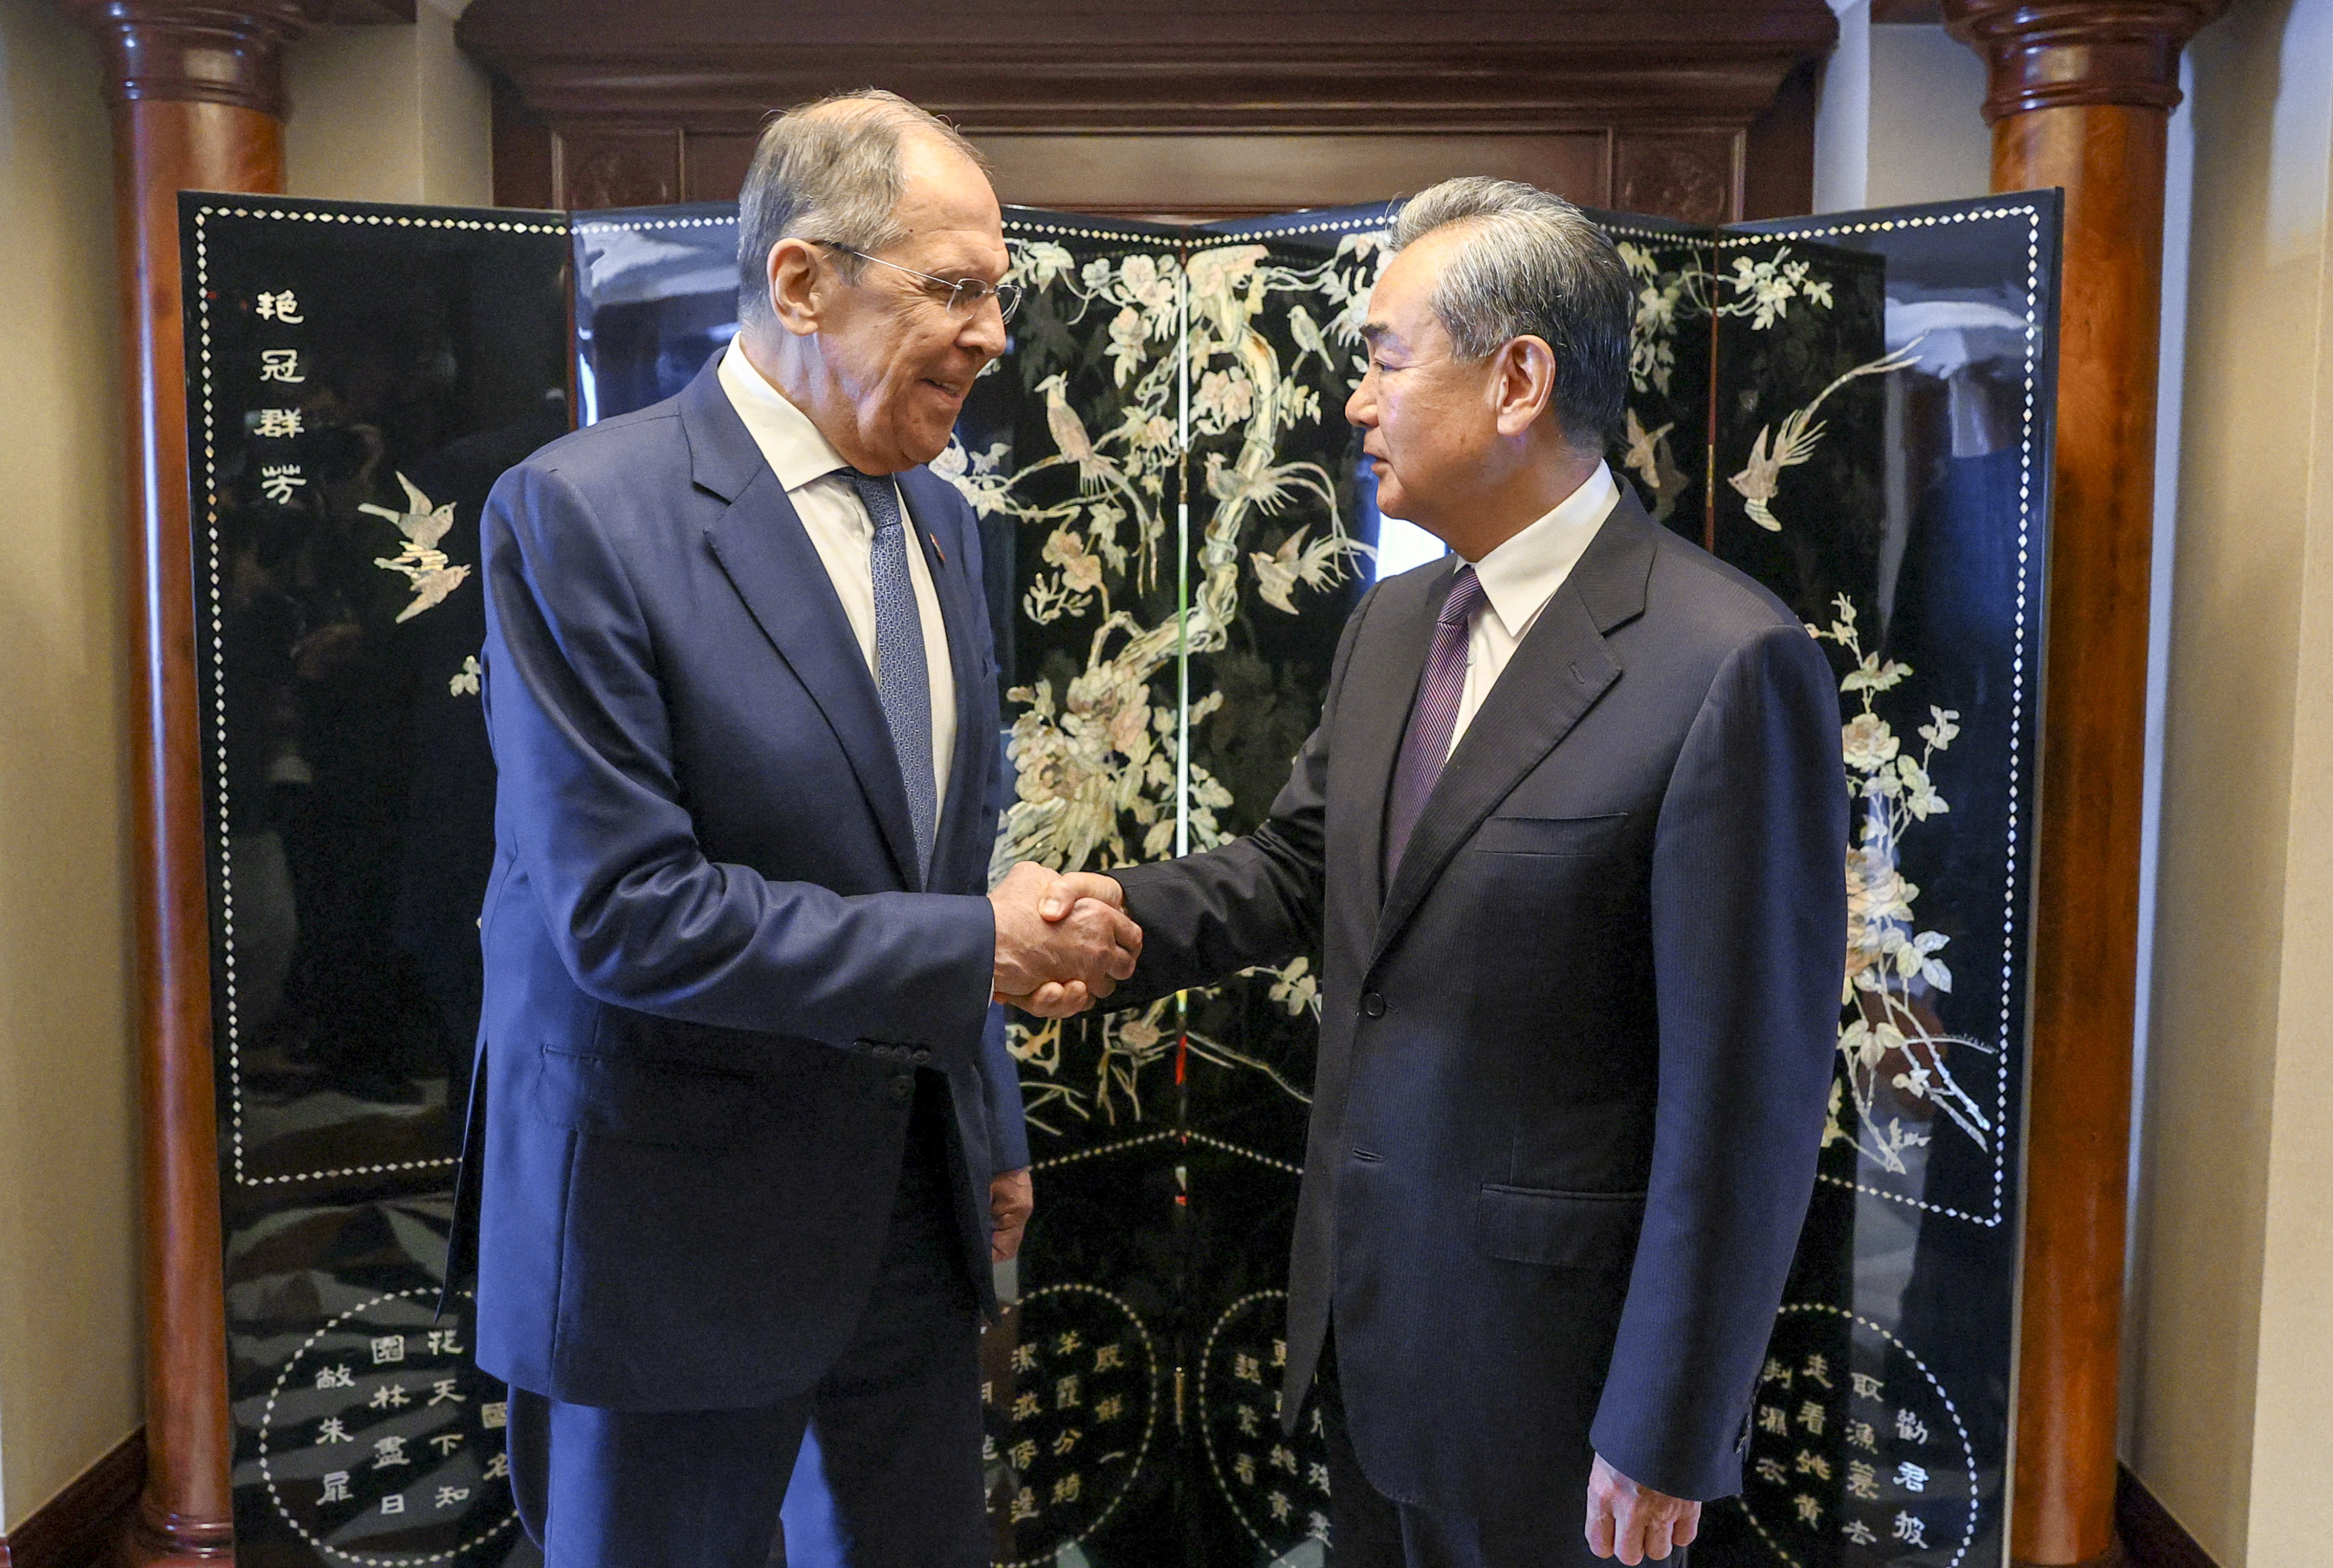 Russian Foreign Minister Sergey Lavrov meets Wang Yi, China’s top diplomat, in Jakarta on Thursday. Photo: Handout via Reuters